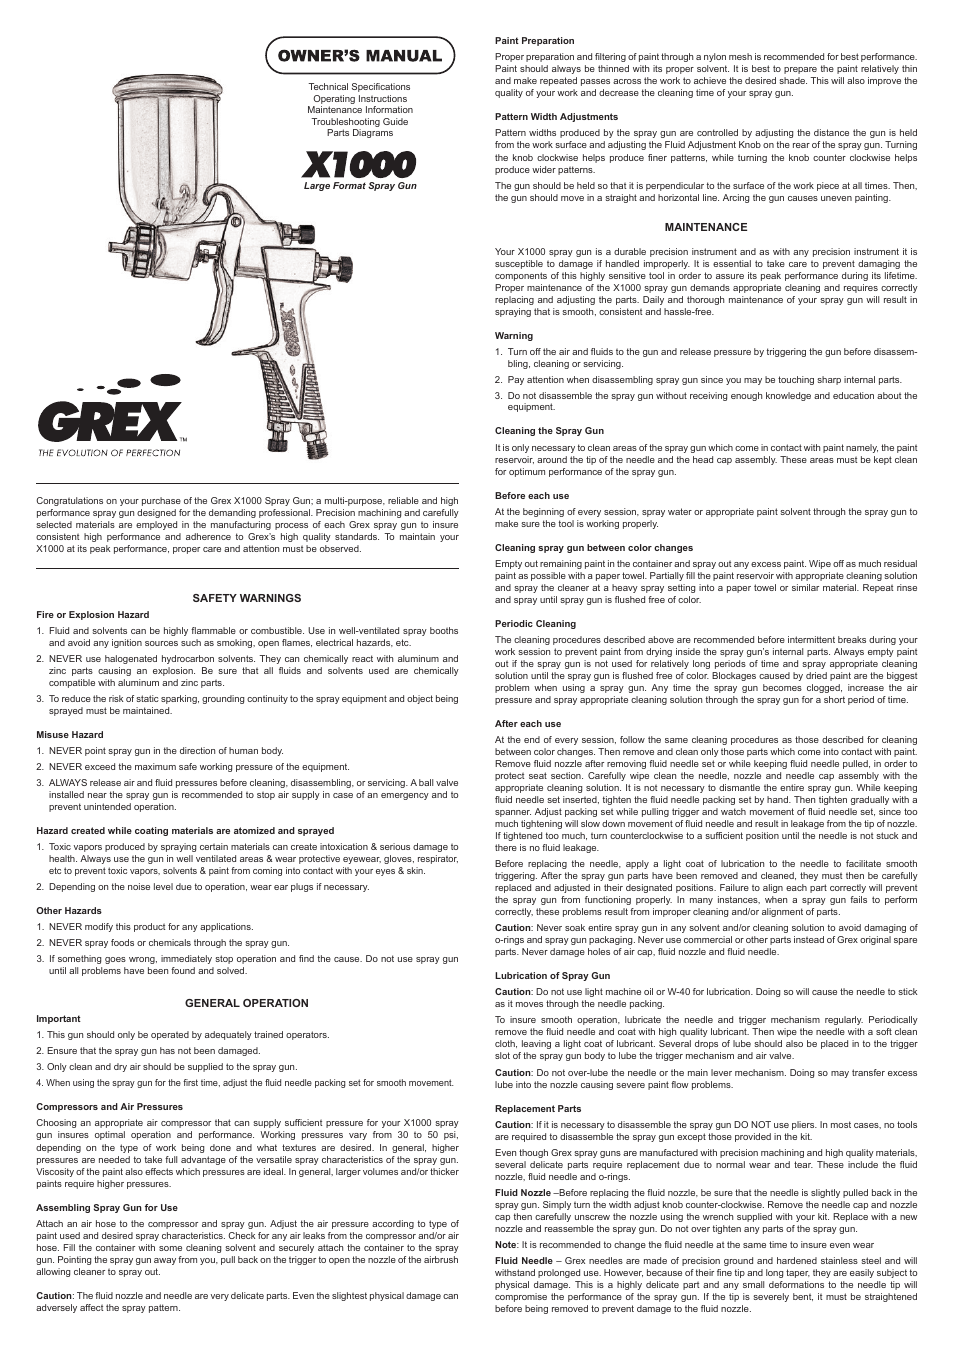 Grex Power Tools X1000 User Manual | 2 pages